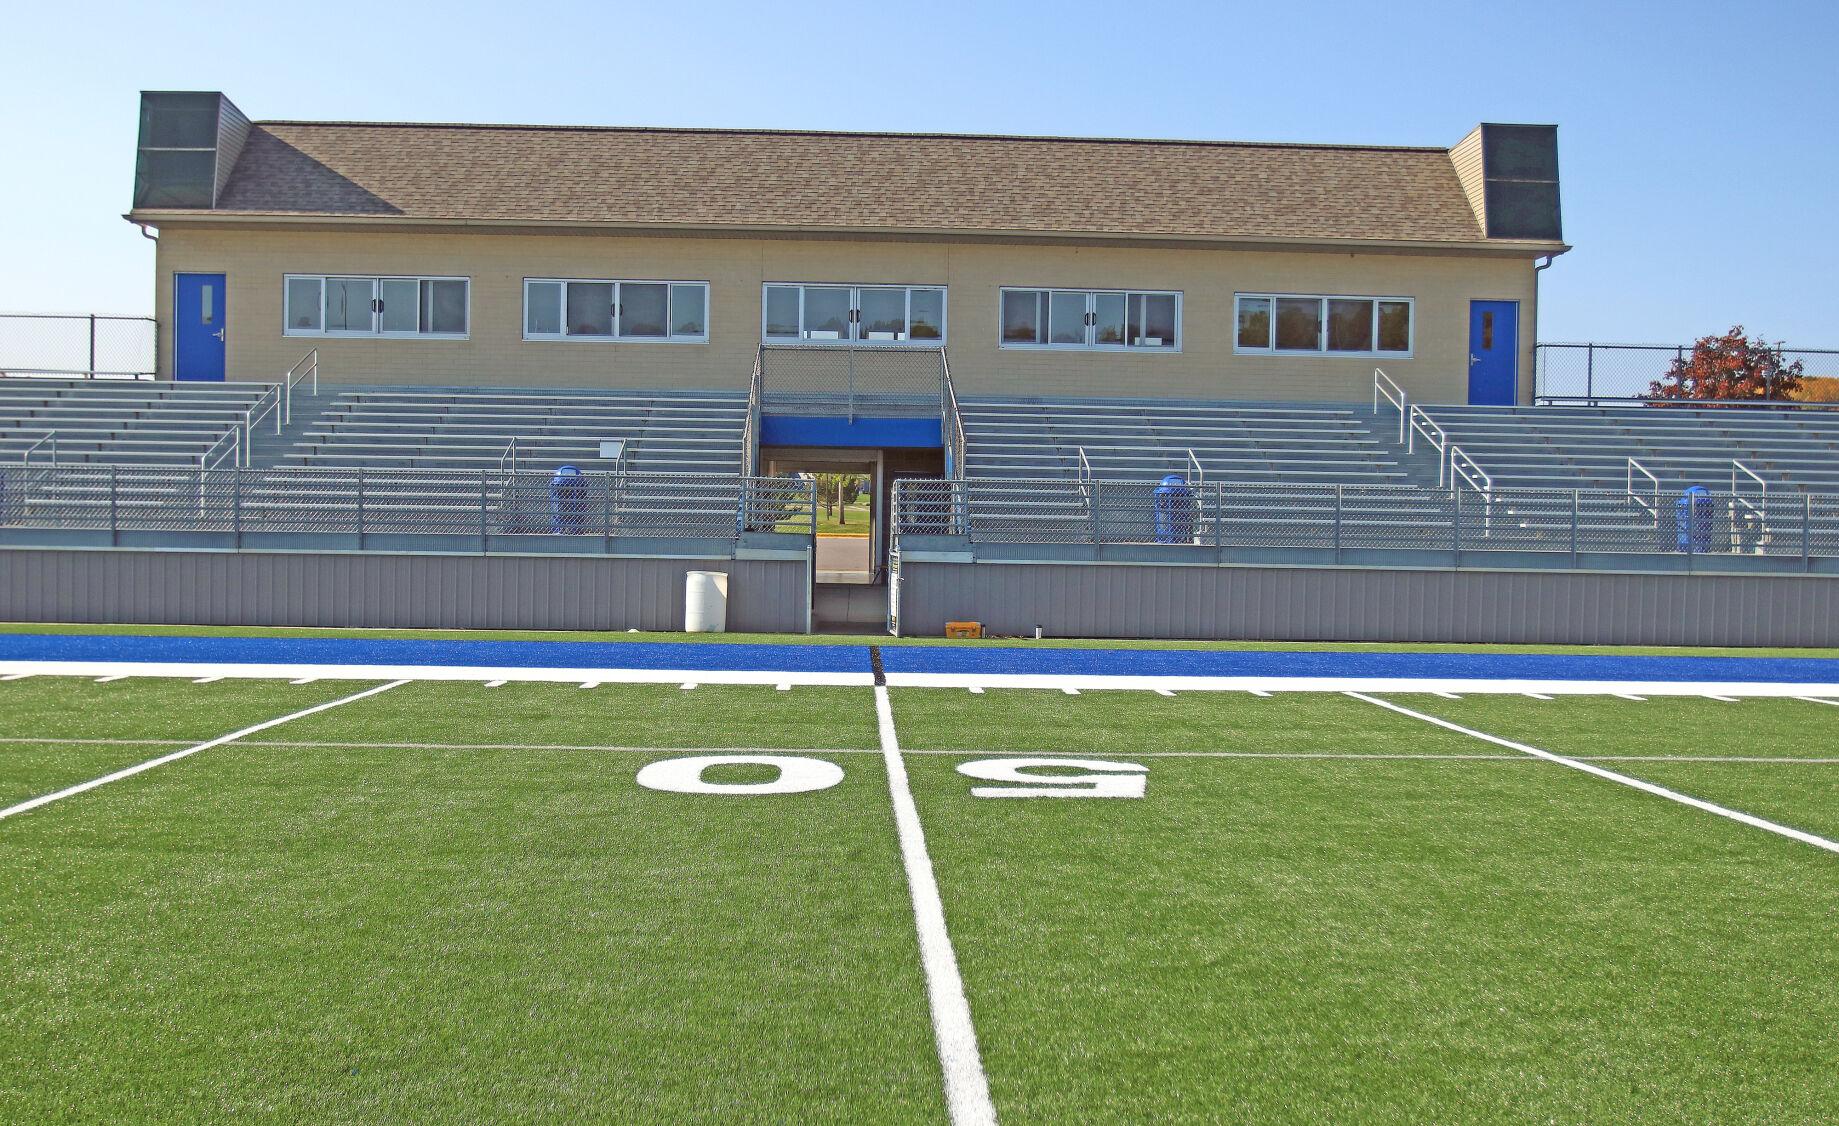 Lodi High School shows off new state of the art football and soccer